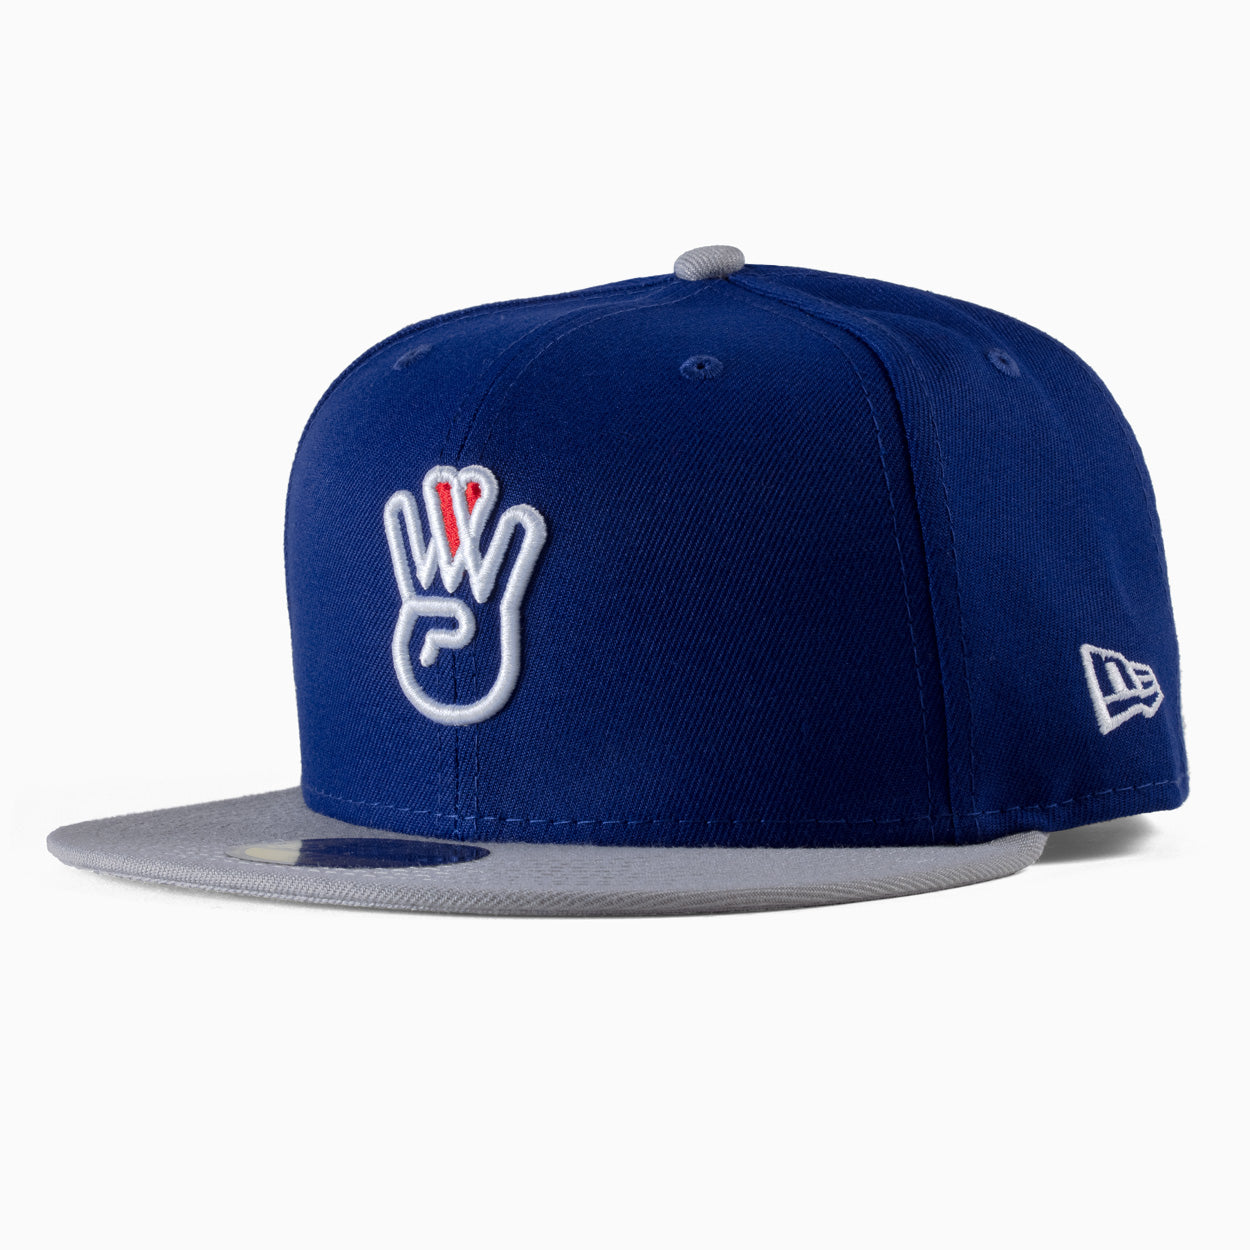 Chavez New Era Fitted